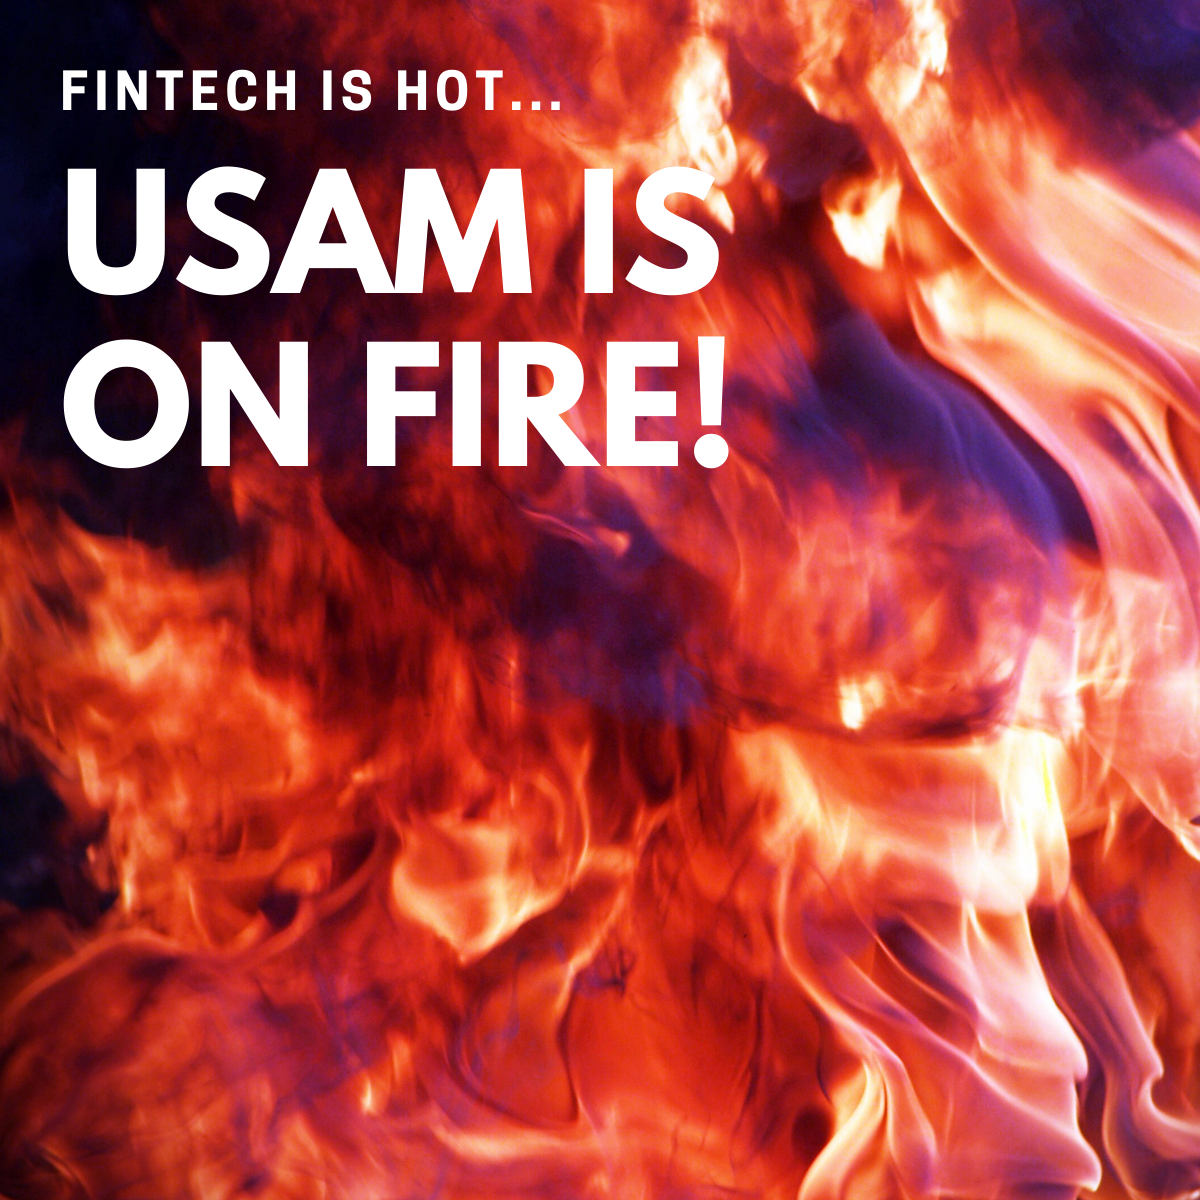 USAM IS ON FIRE